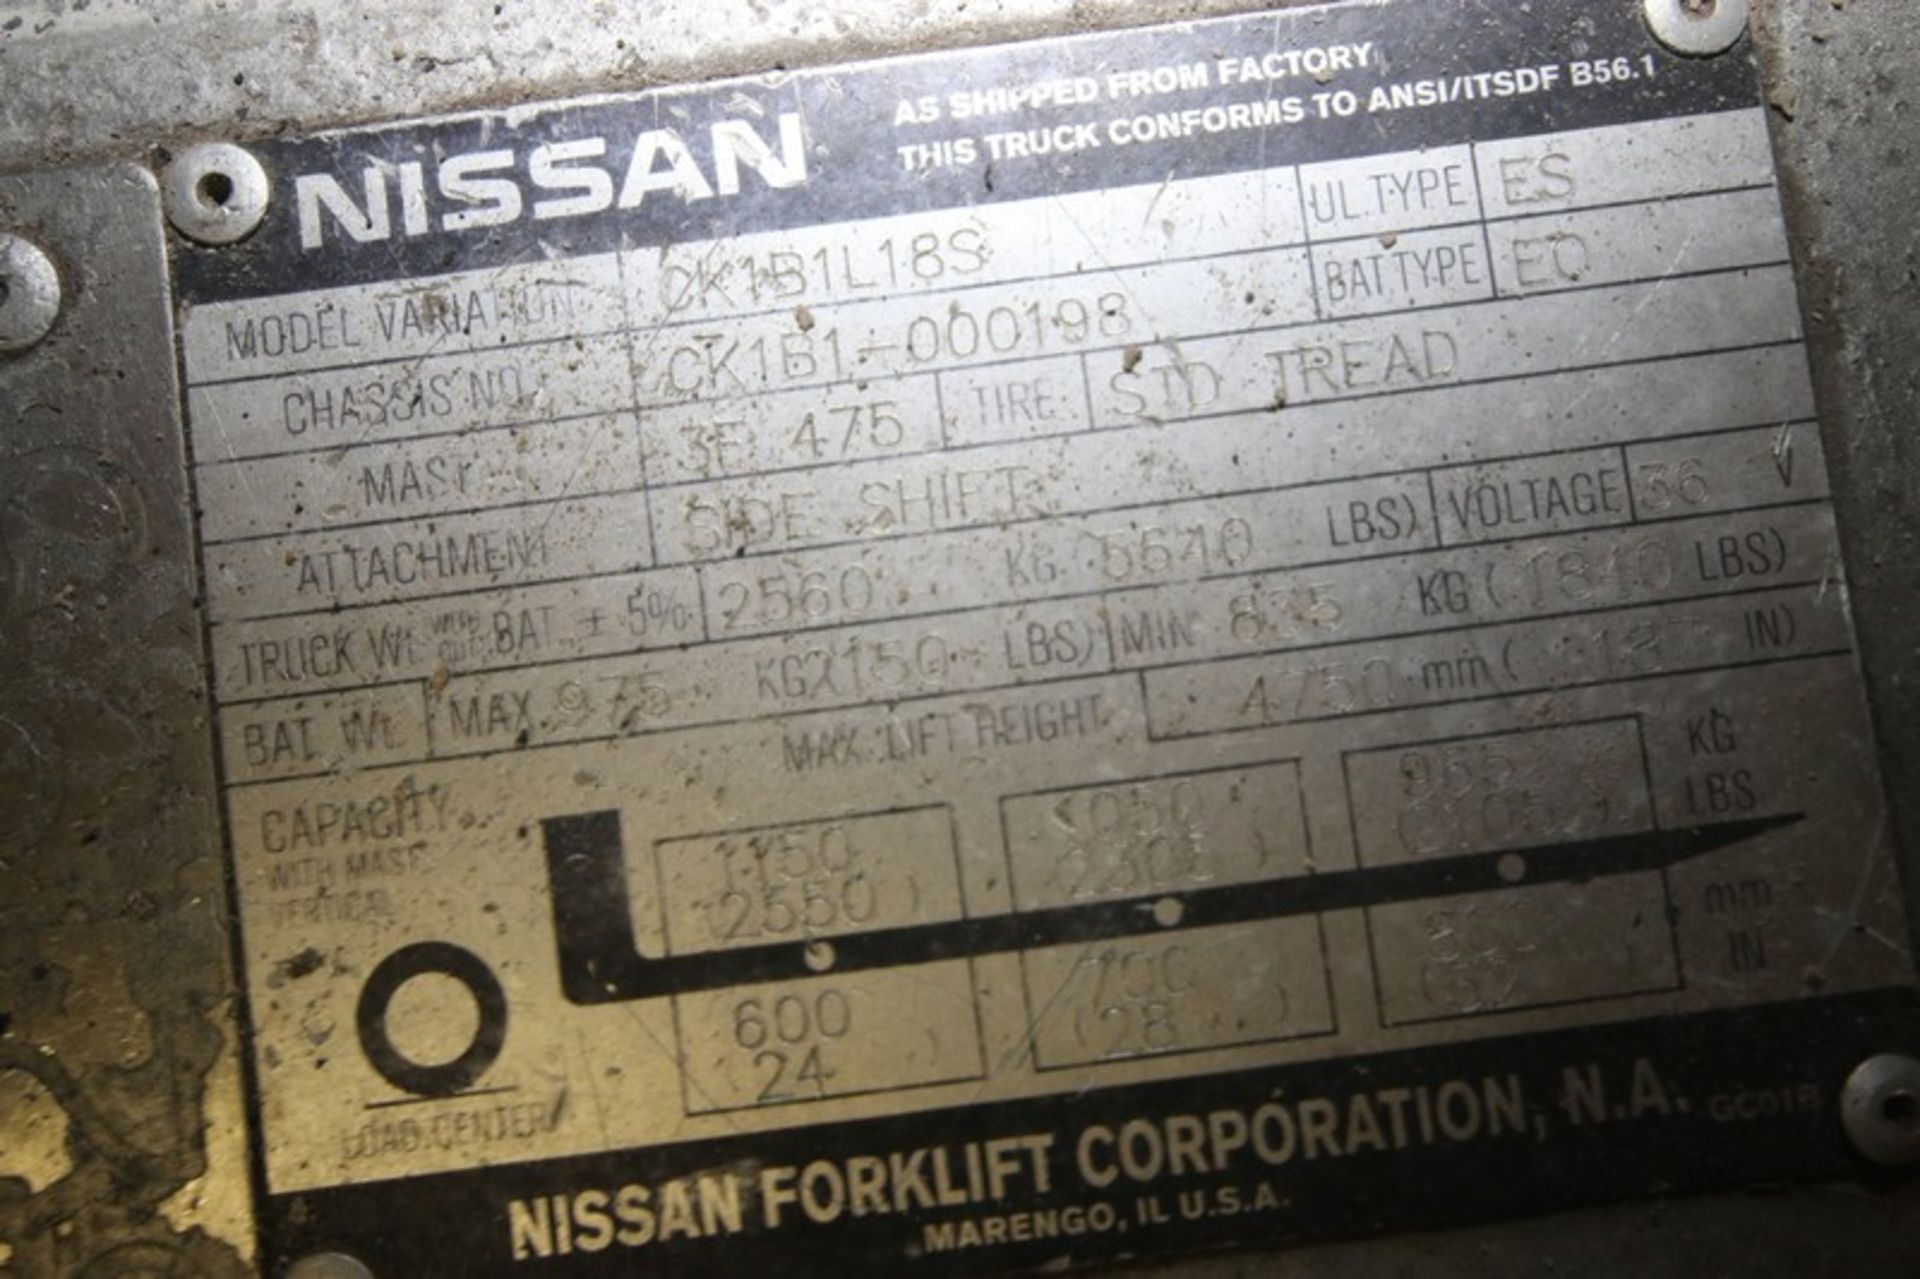 Nissan 2,250 lbs. Sit-Down Electric Forklift, M/N CK1B1L185, Chassis No.: CK1B1-00019B, with 3-Stage - Image 8 of 9